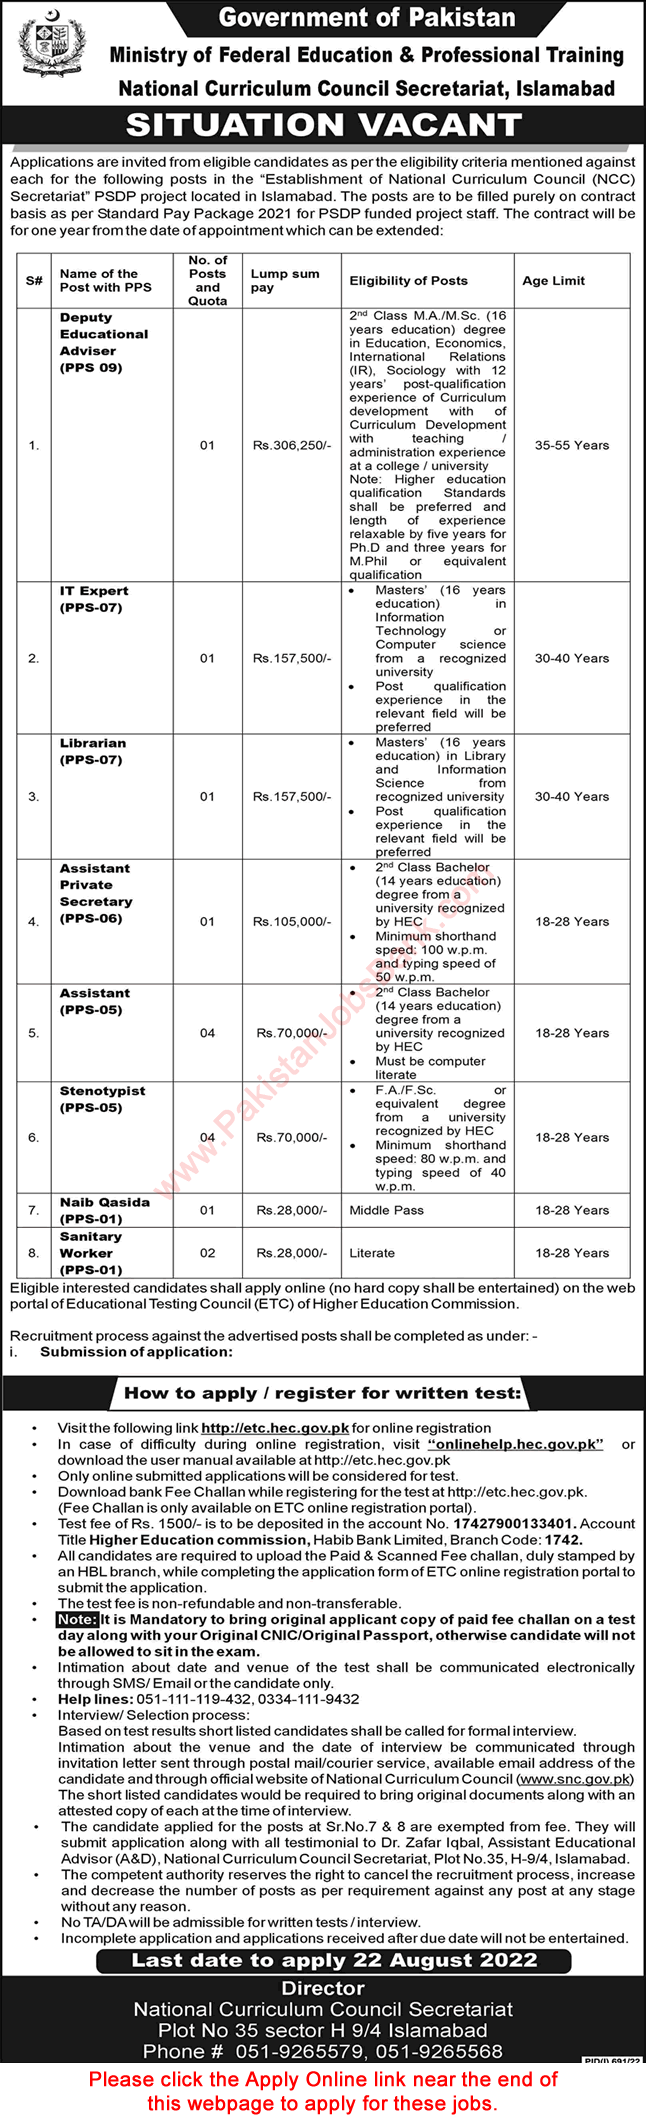 Ministry of Federal Education and Professional Training Islamabad Jobs 2022 August Apply Online National Curriculum Council NCC Latest